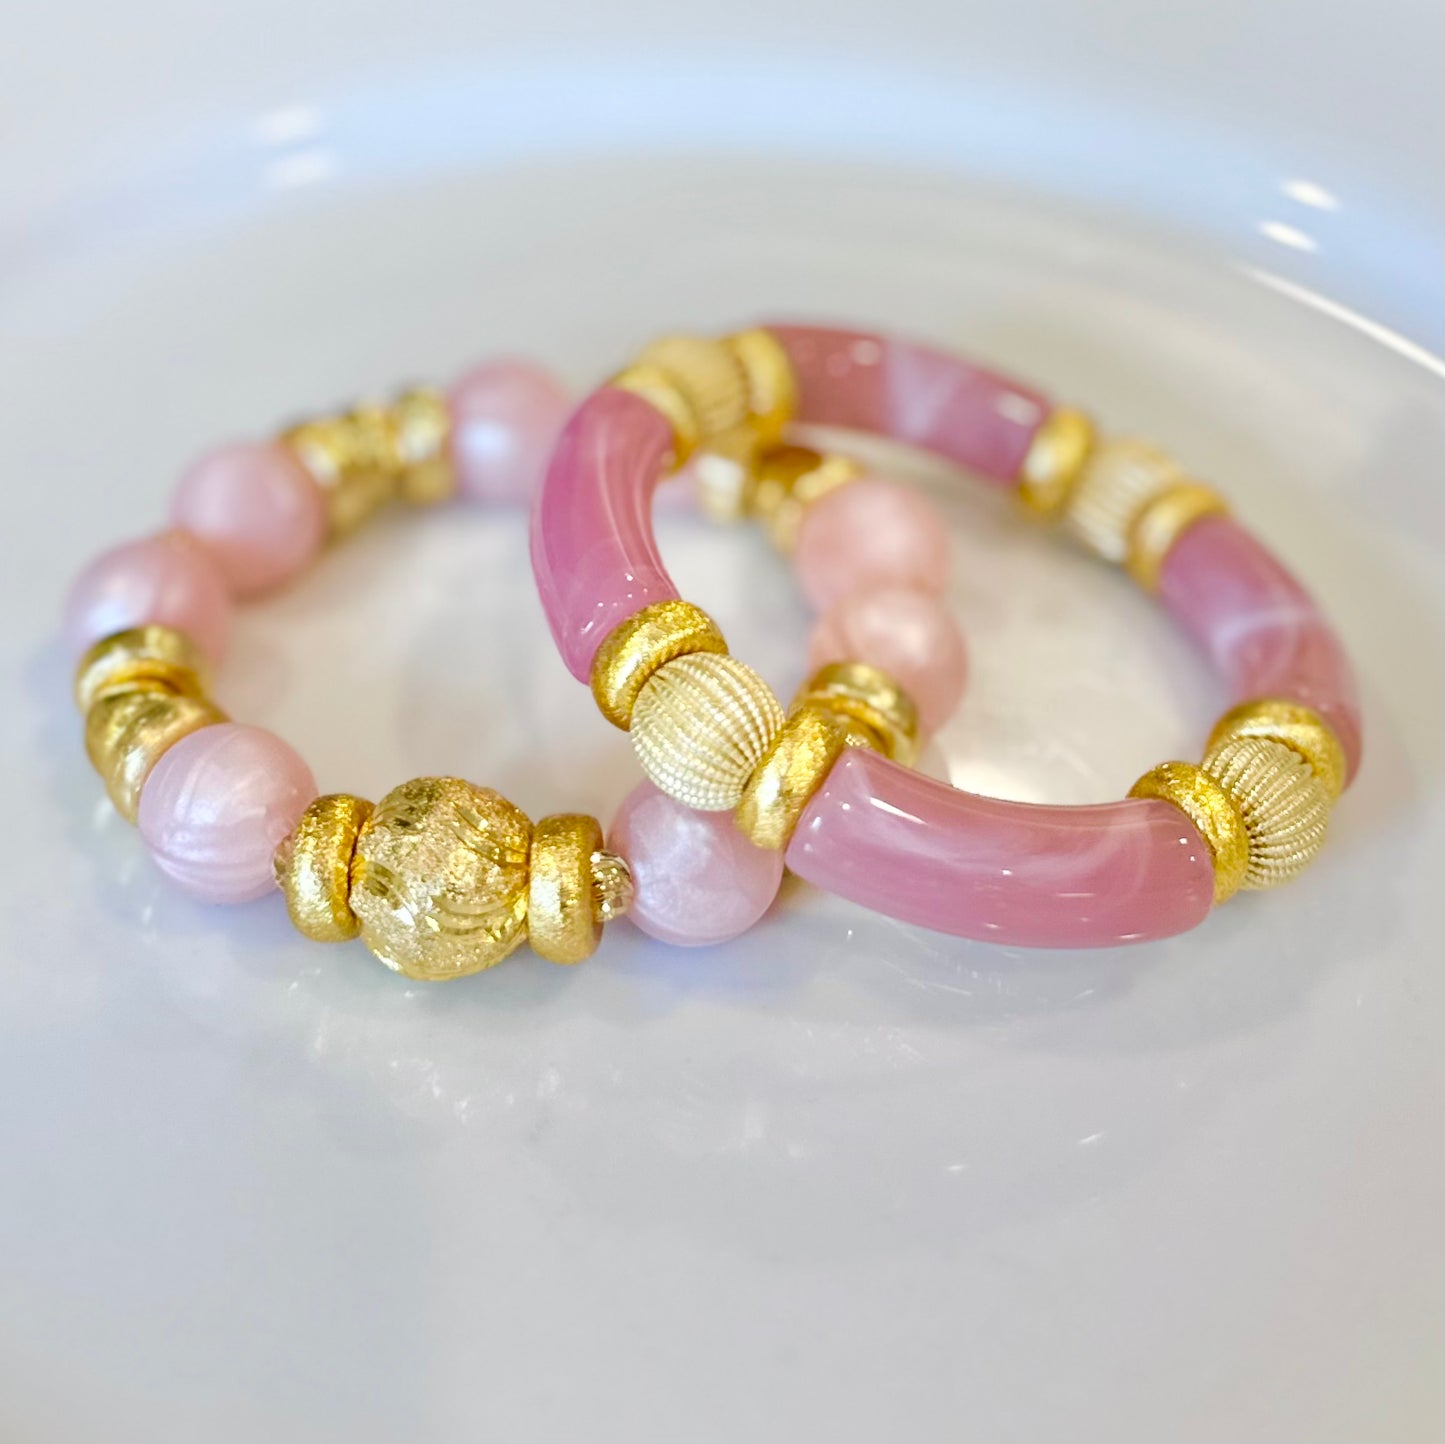 PEARLIZED LIGHT PINK AND GOLD BANGLE WITH CZ ACCENTS